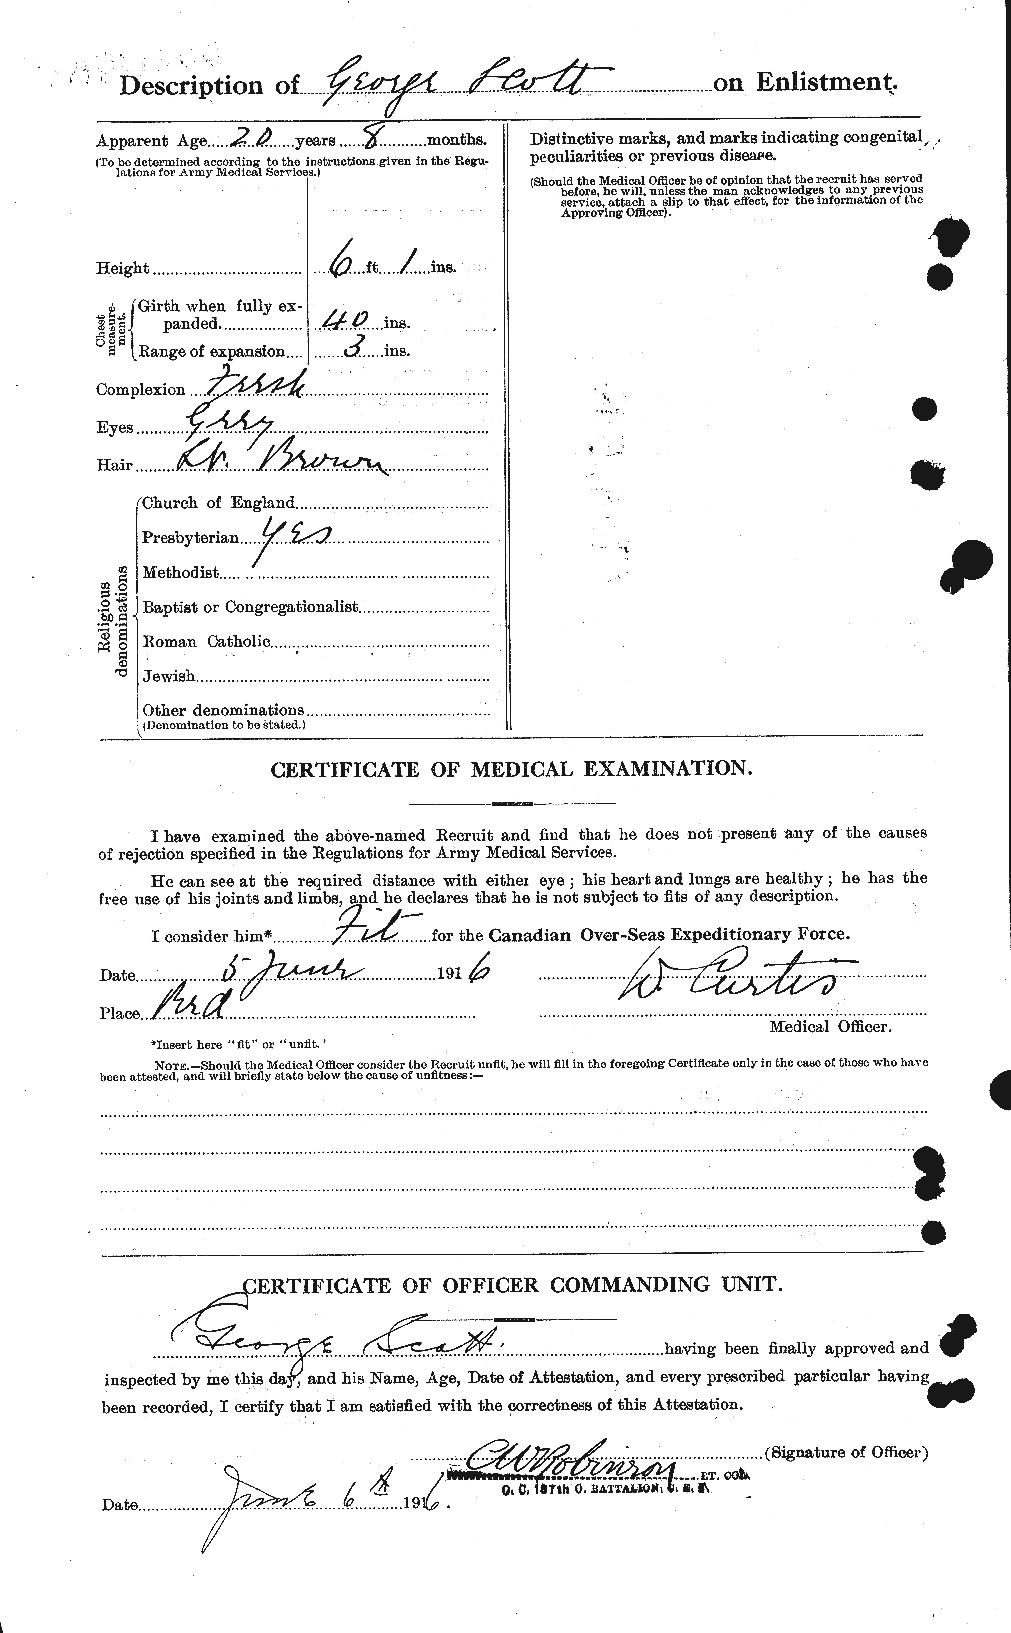 Personnel Records of the First World War - CEF 084348b